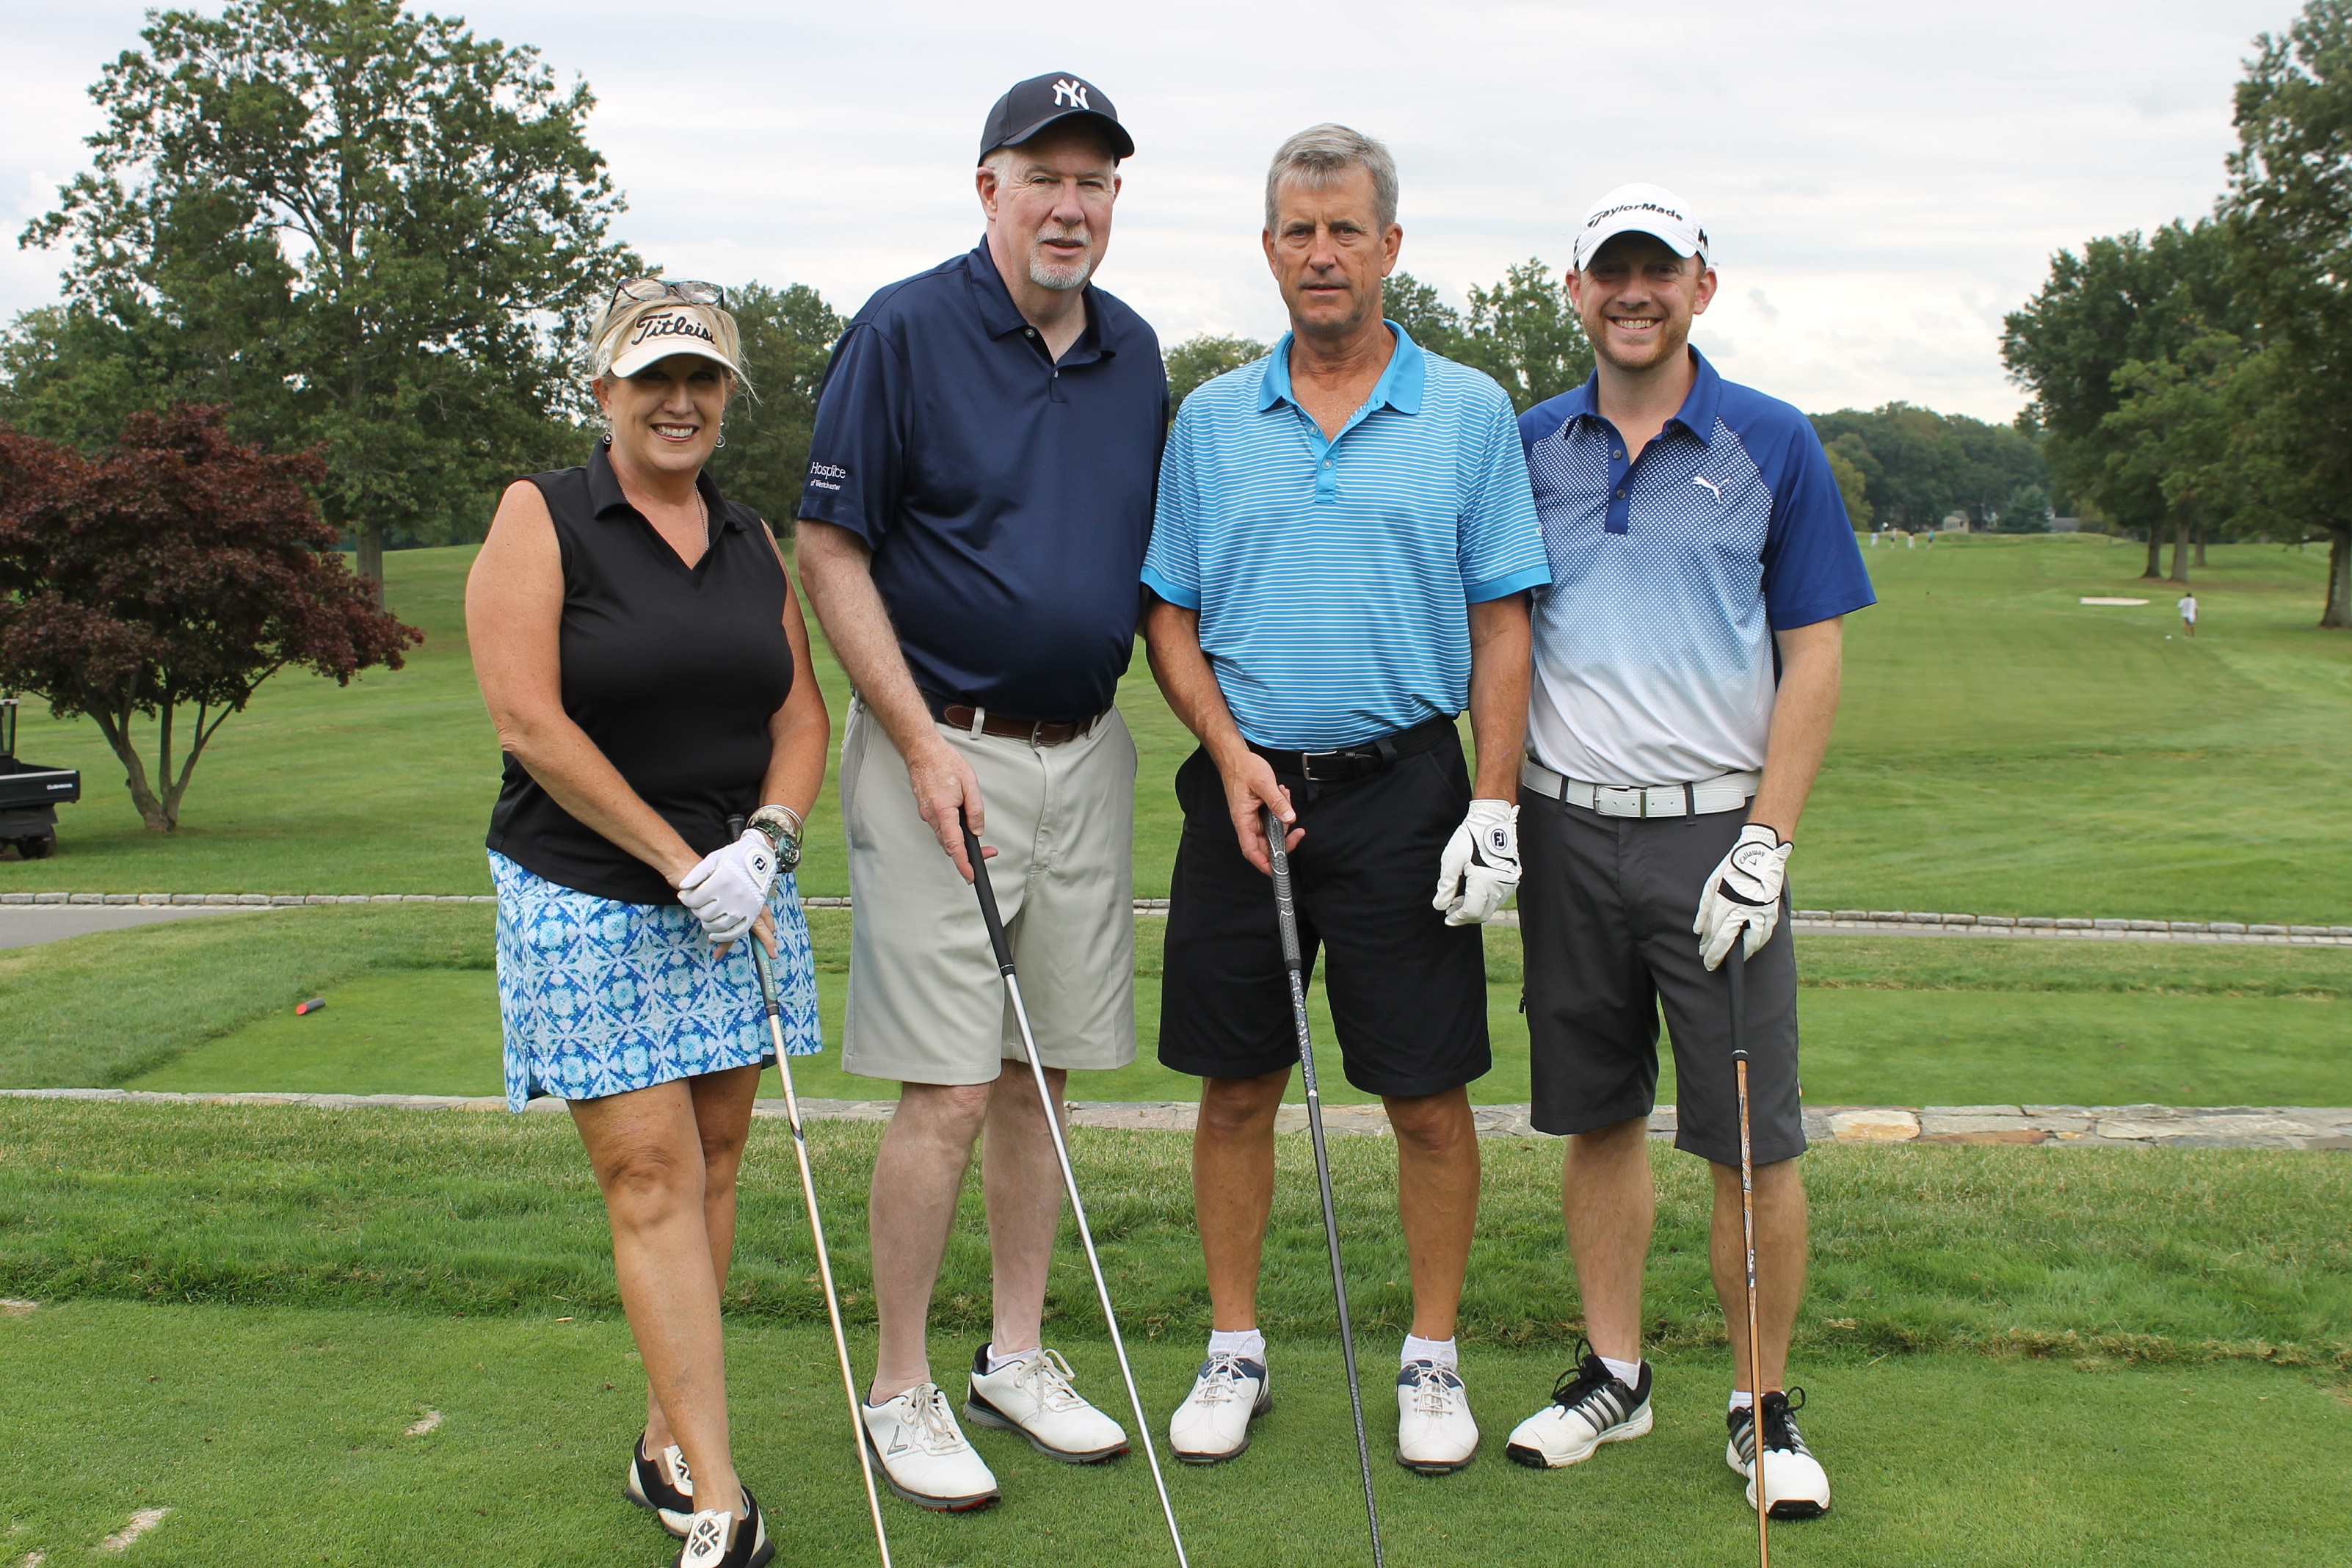 Jim O’Connor, event co-chair (second from left), and the Empress Ambulance foursome at HOW’s 17th Annual Golf Invitational.